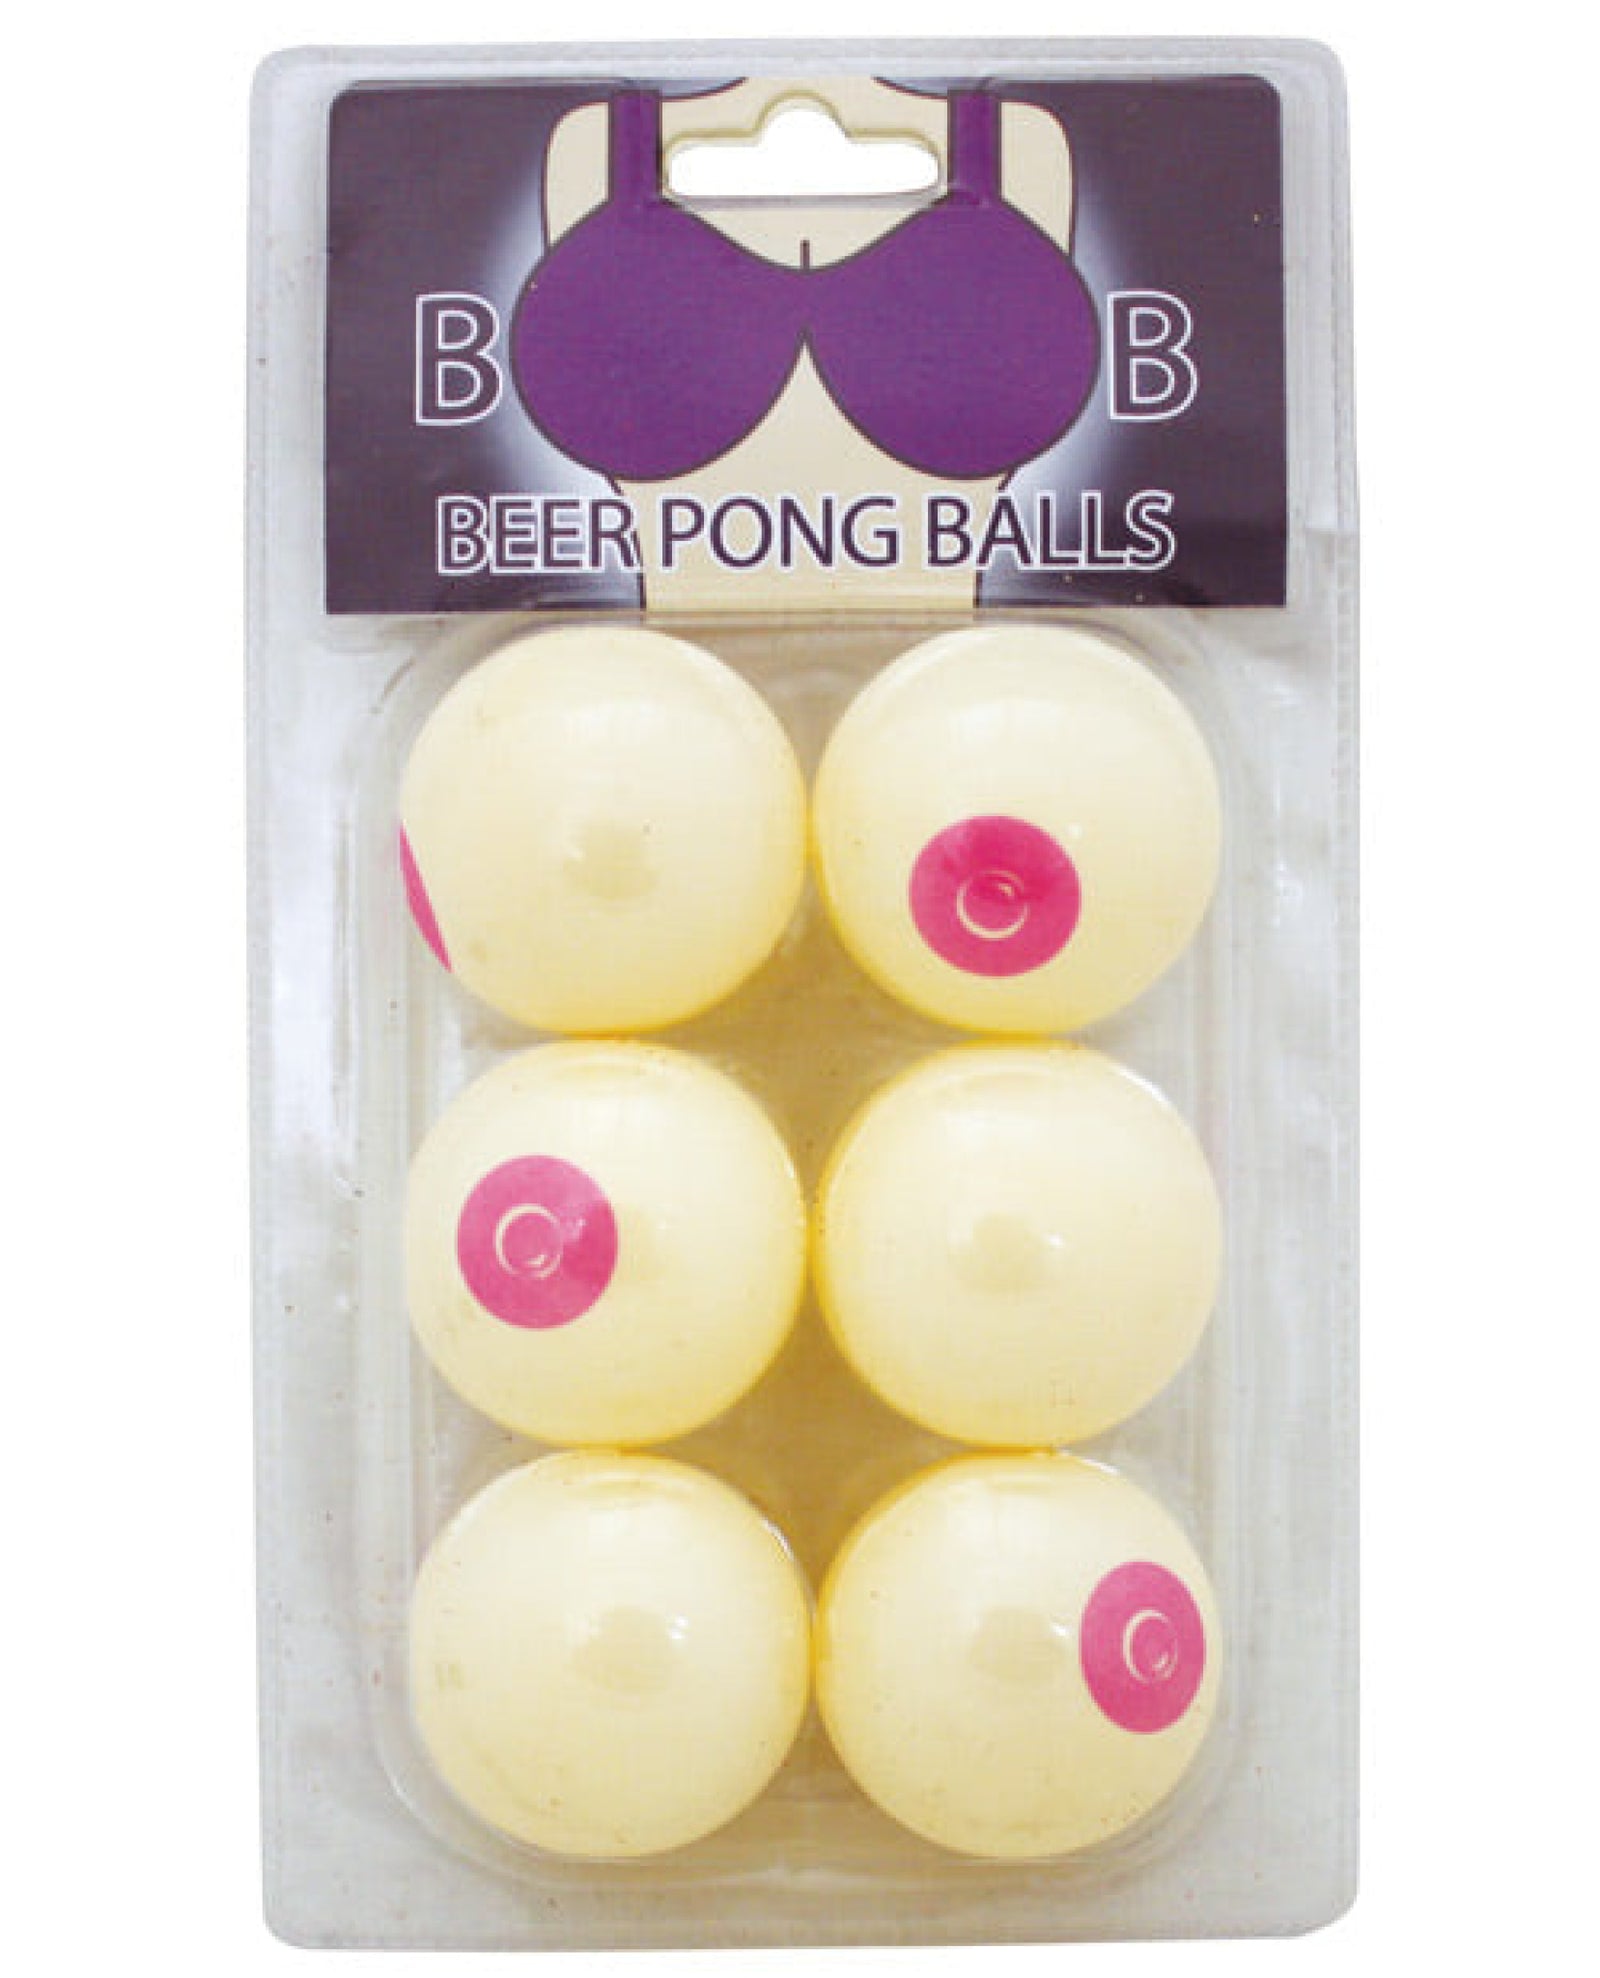 Boob Beer Pong Balls - Pack Of 6 Island Dogs